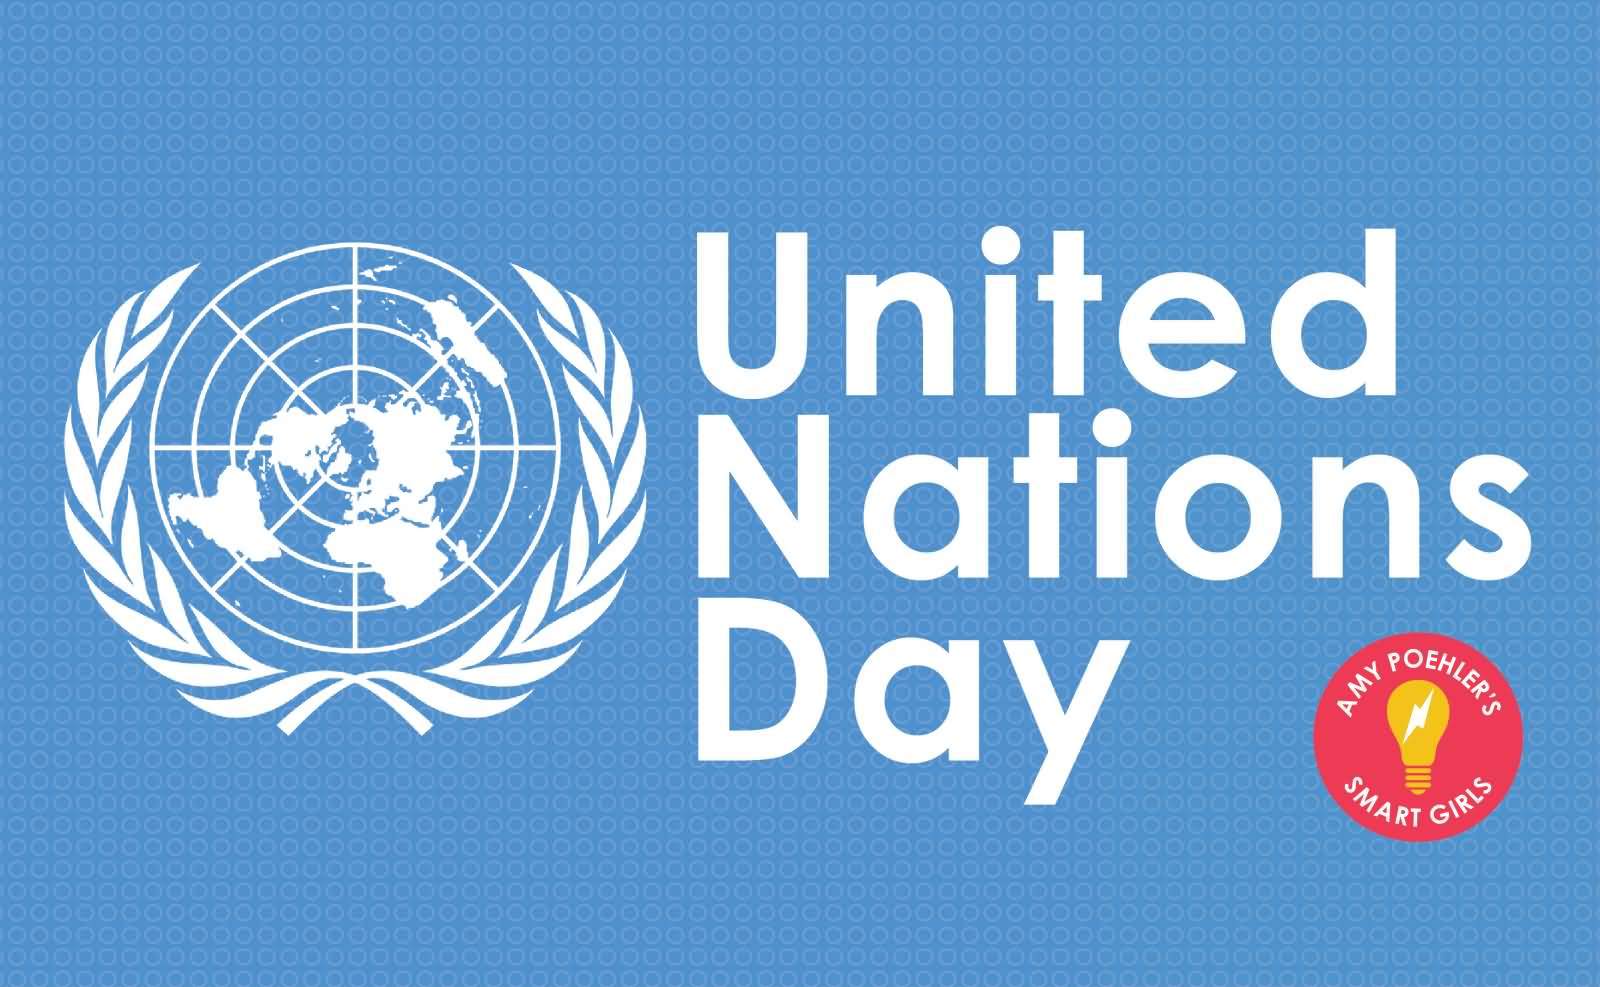 United Nations Day Wishes